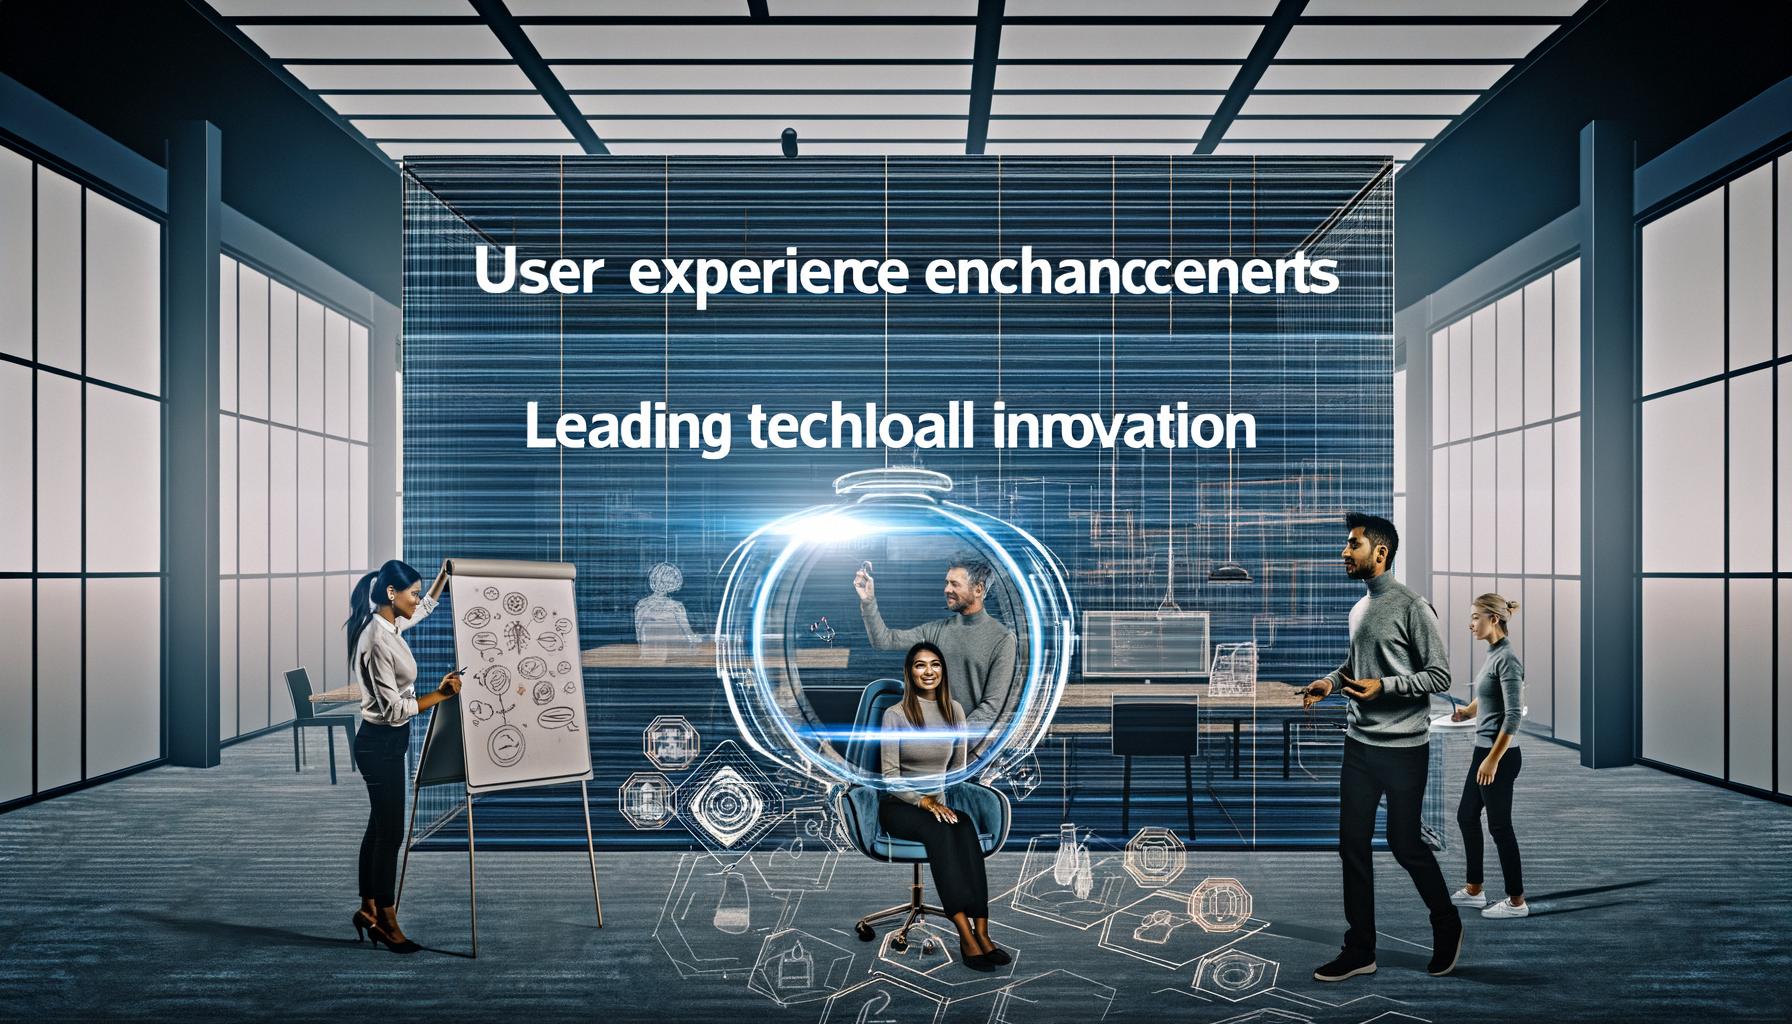 Tech platforms prioritize user experience innovations across finance, social media, and wellness.